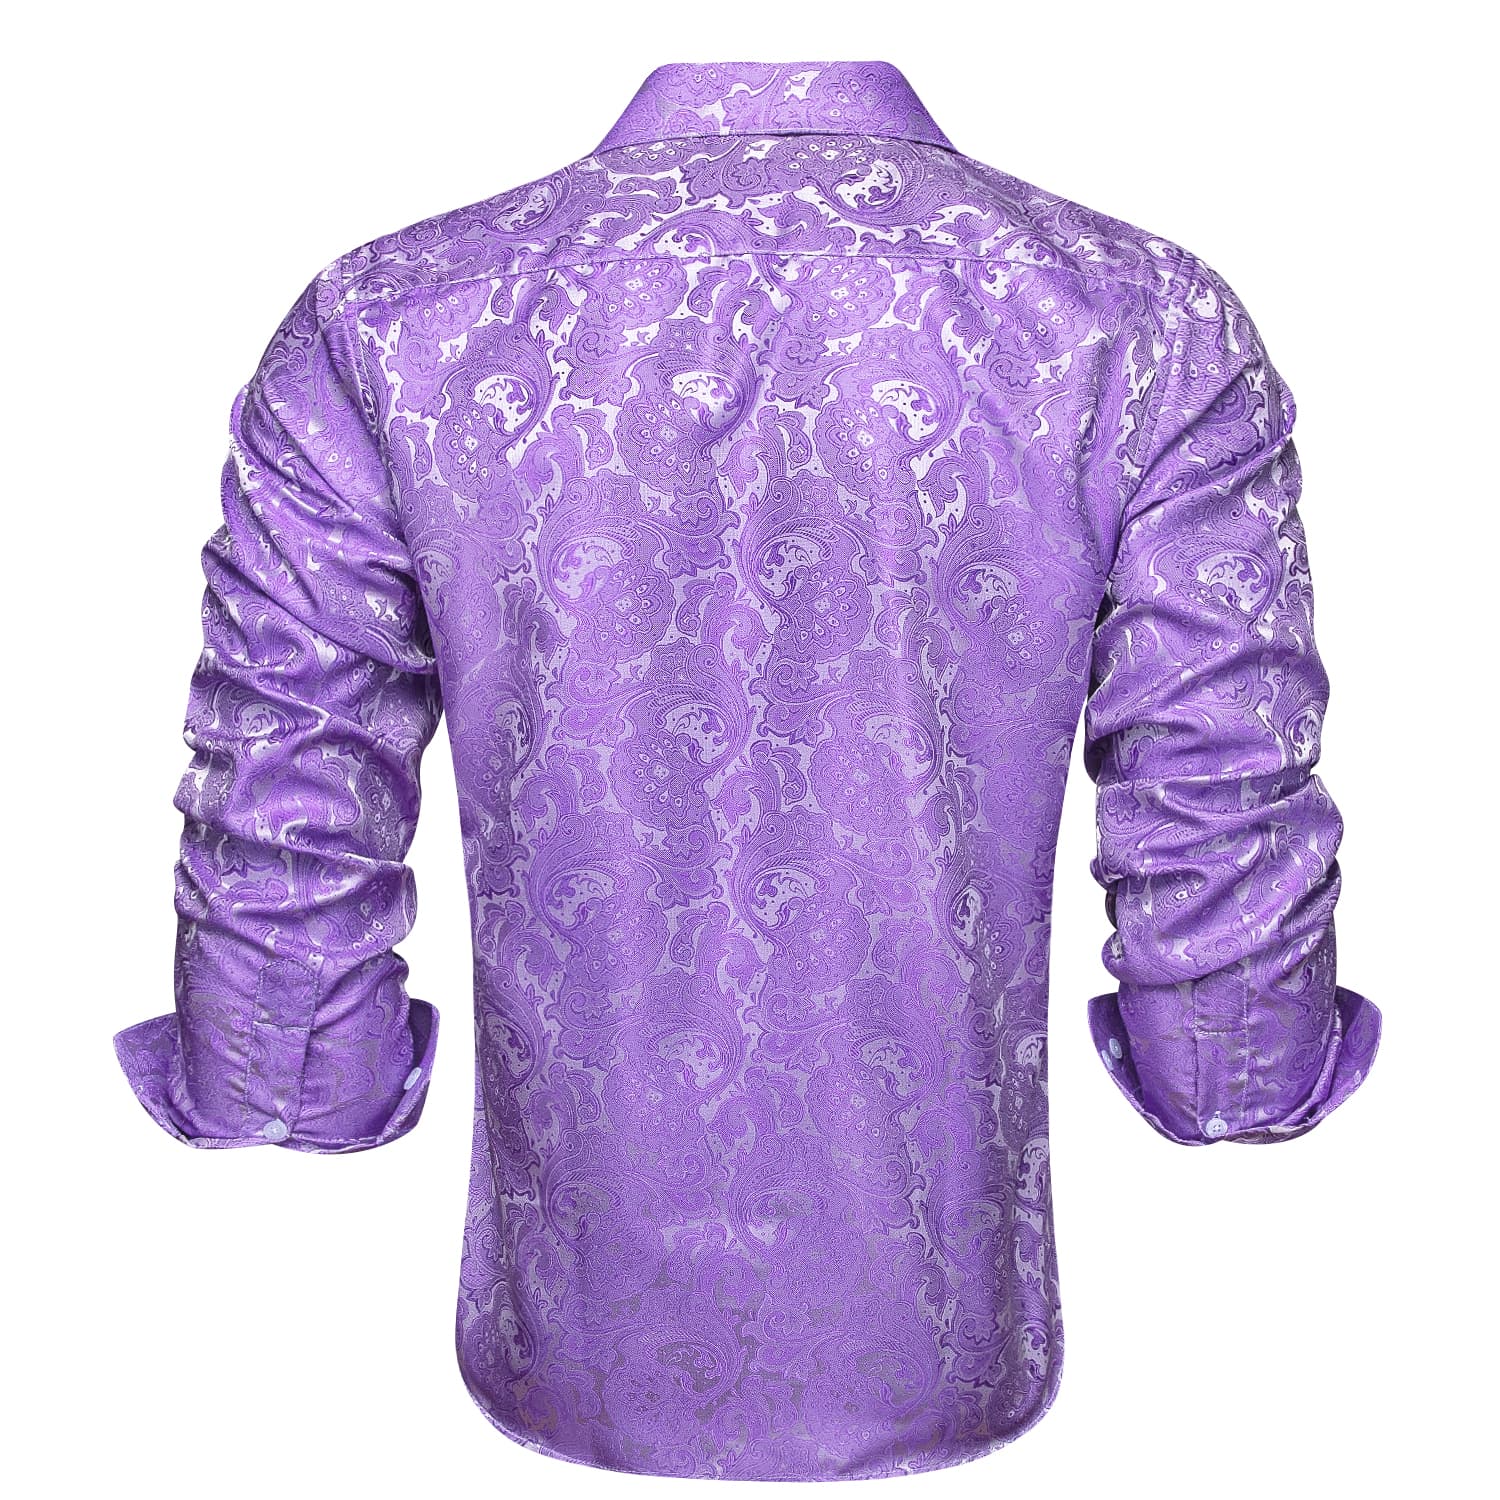 The back picture of Amethyst Purple Jacquard Mens Button Down Shirt